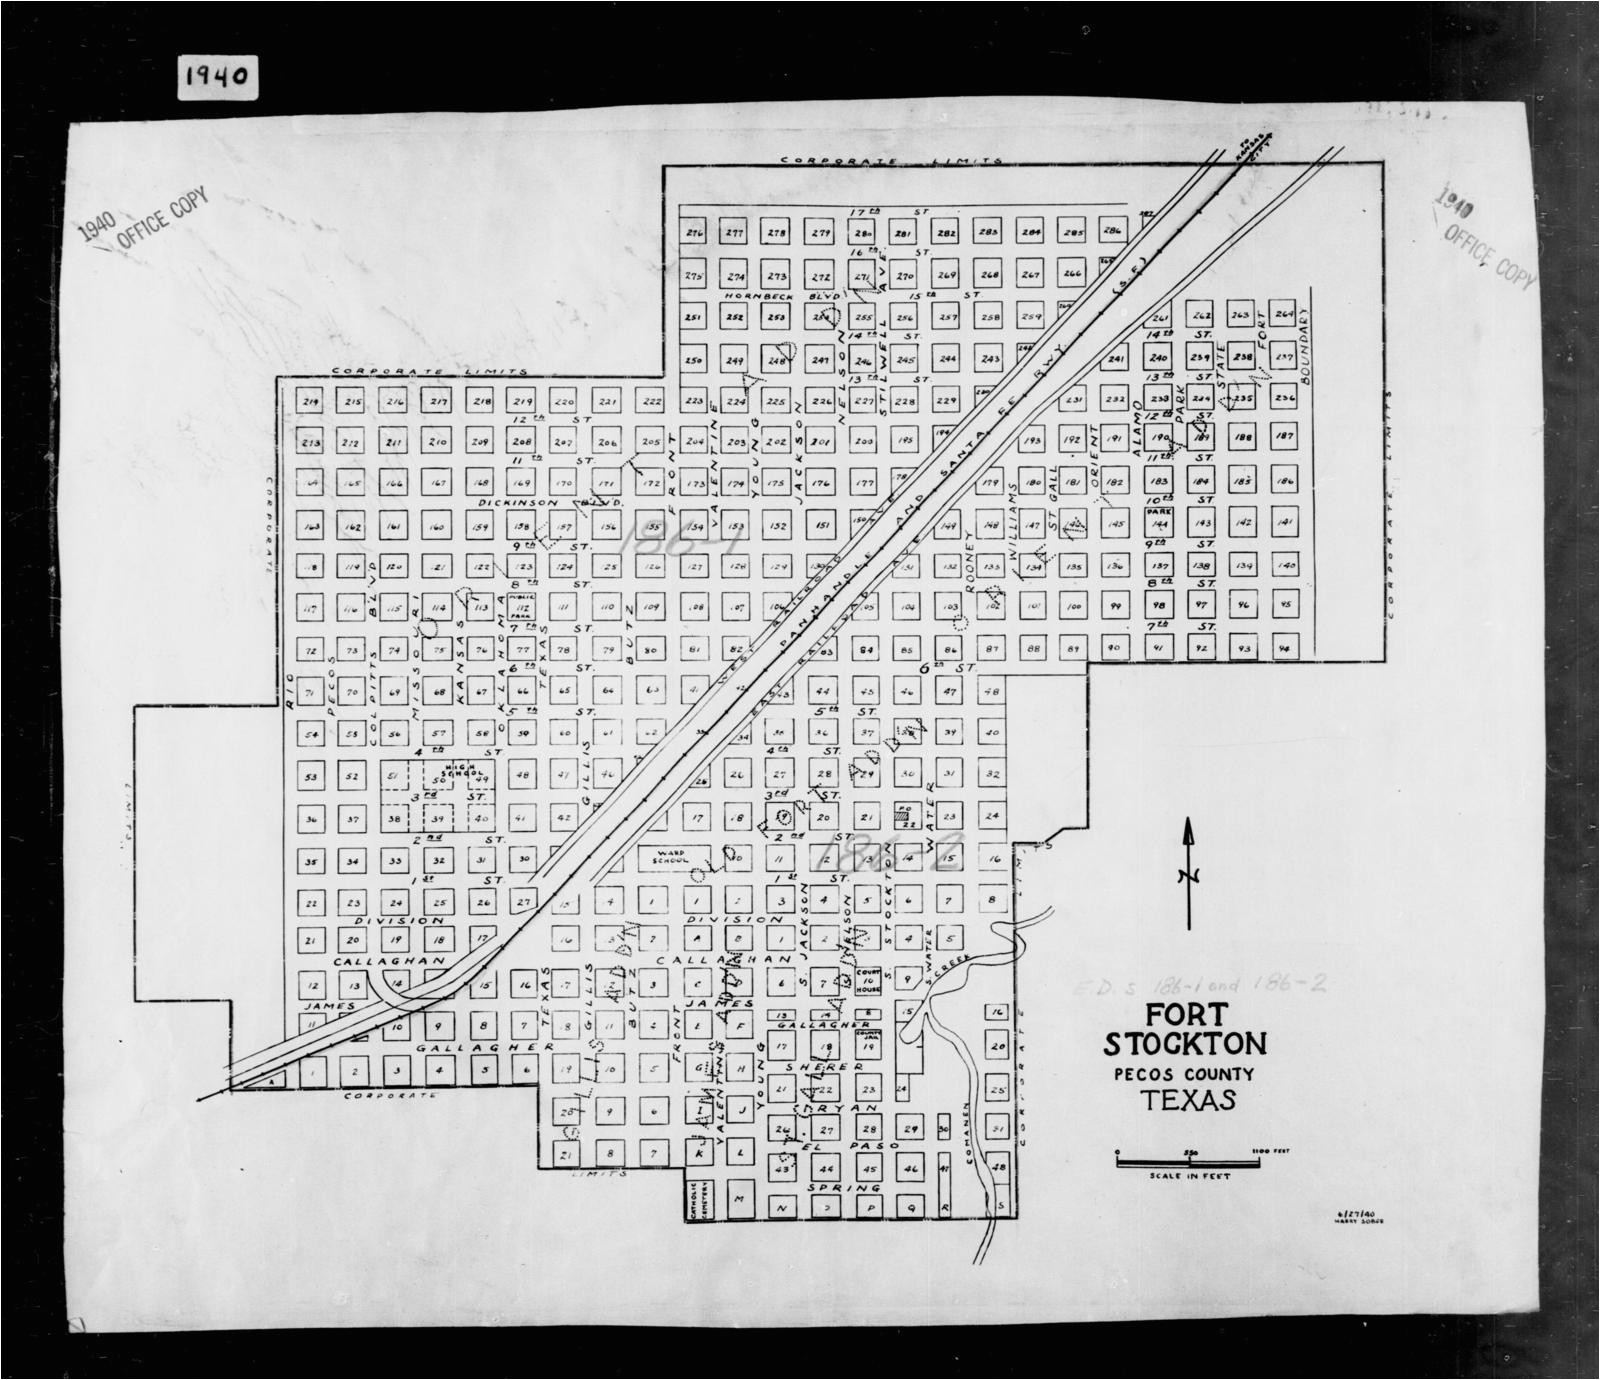 1940 census enumeration district maps texas pecos county fort